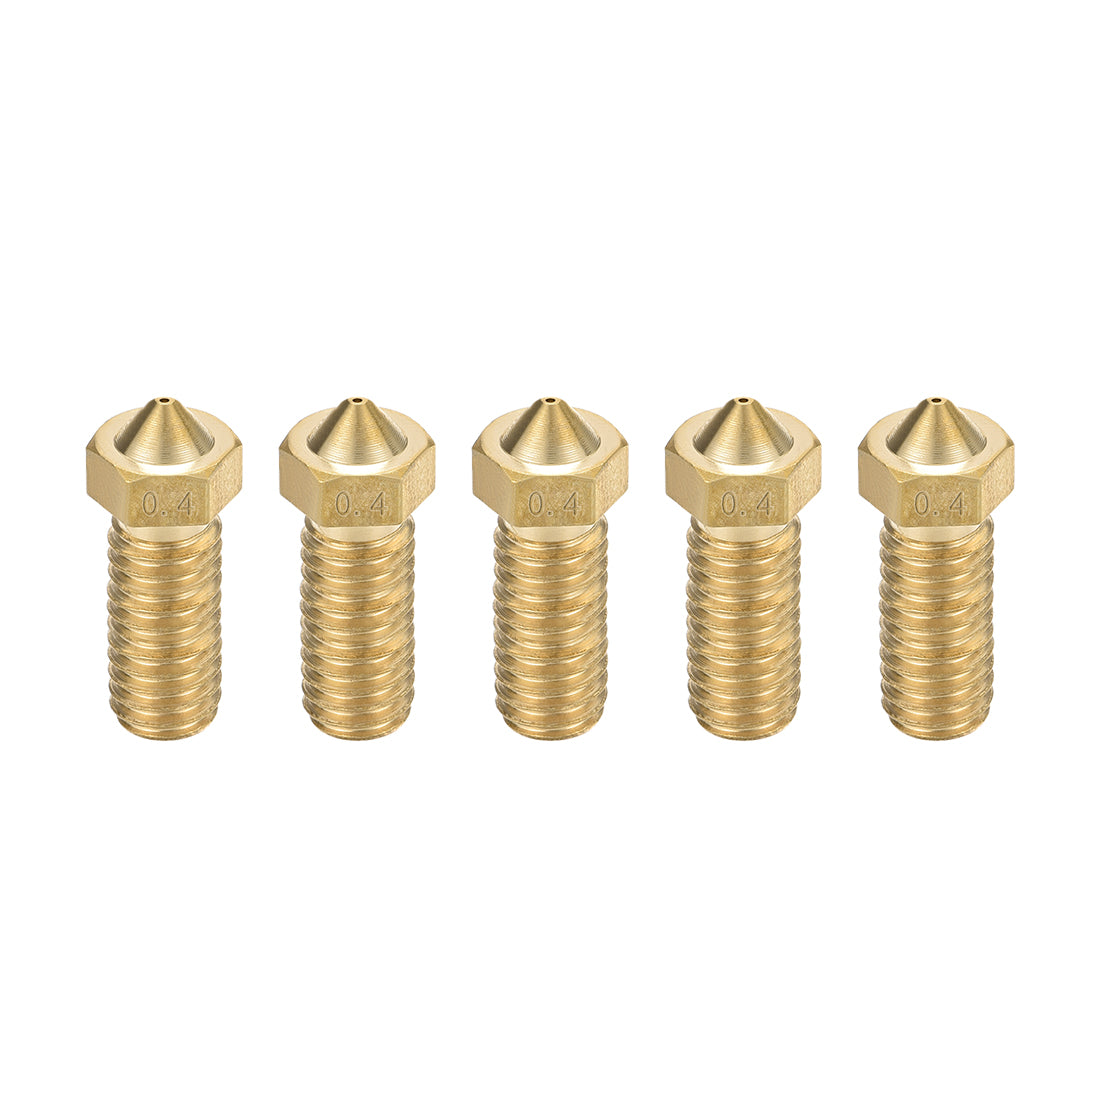 uxcell Uxcell 3D Printer Nozzle Fit for V6,for 1.75mm Filament Brass,0.4mm - 1.2mm Total 5pcs